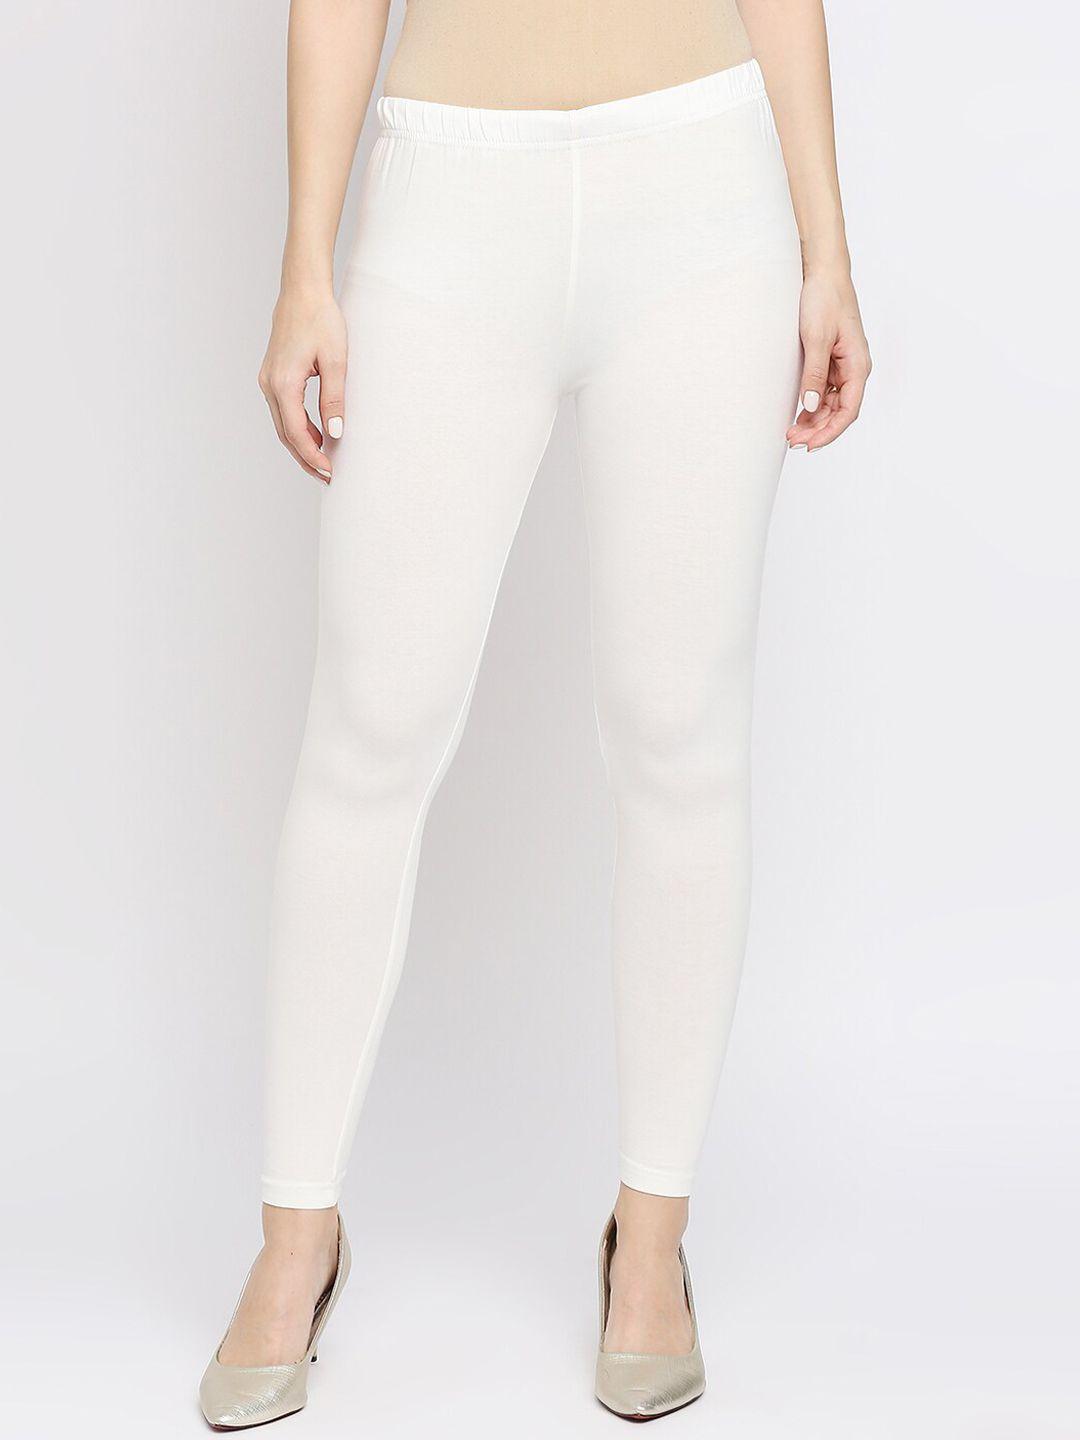 ethnicity women off white solid cotton lycra ankle-length leggings